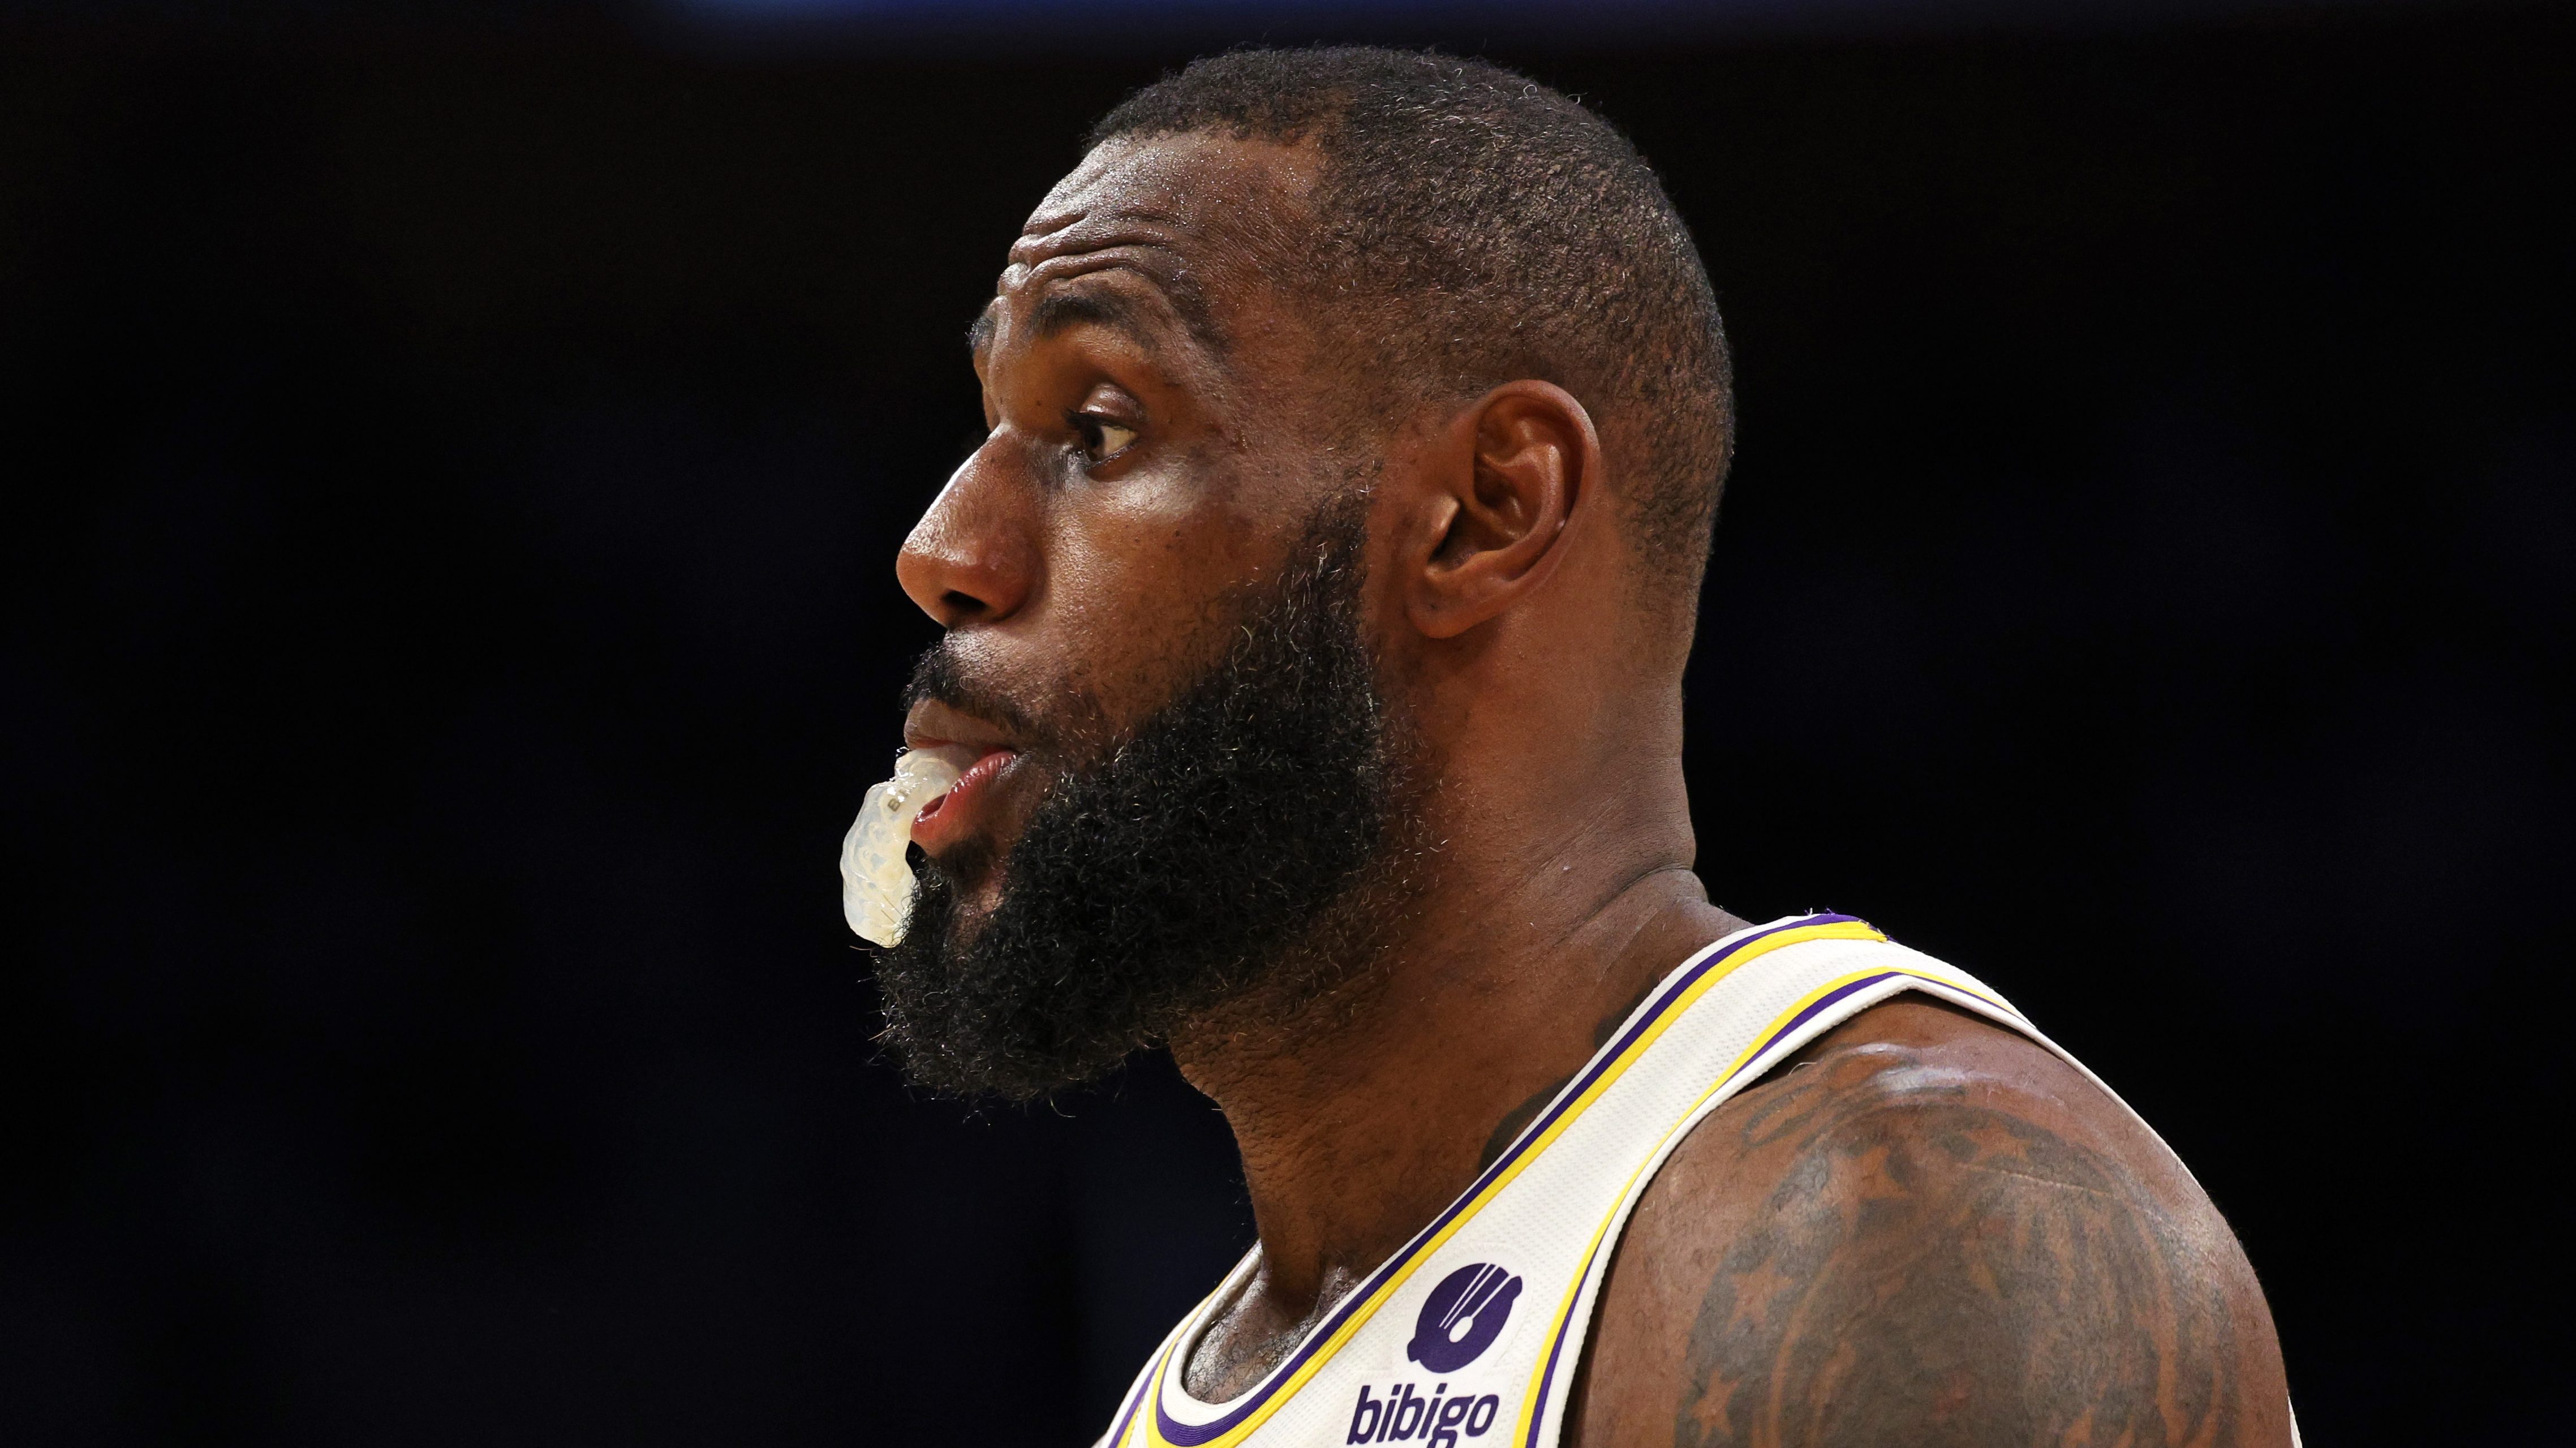 LeBron James out for Lakers vs. Nuggets because of muscle strain